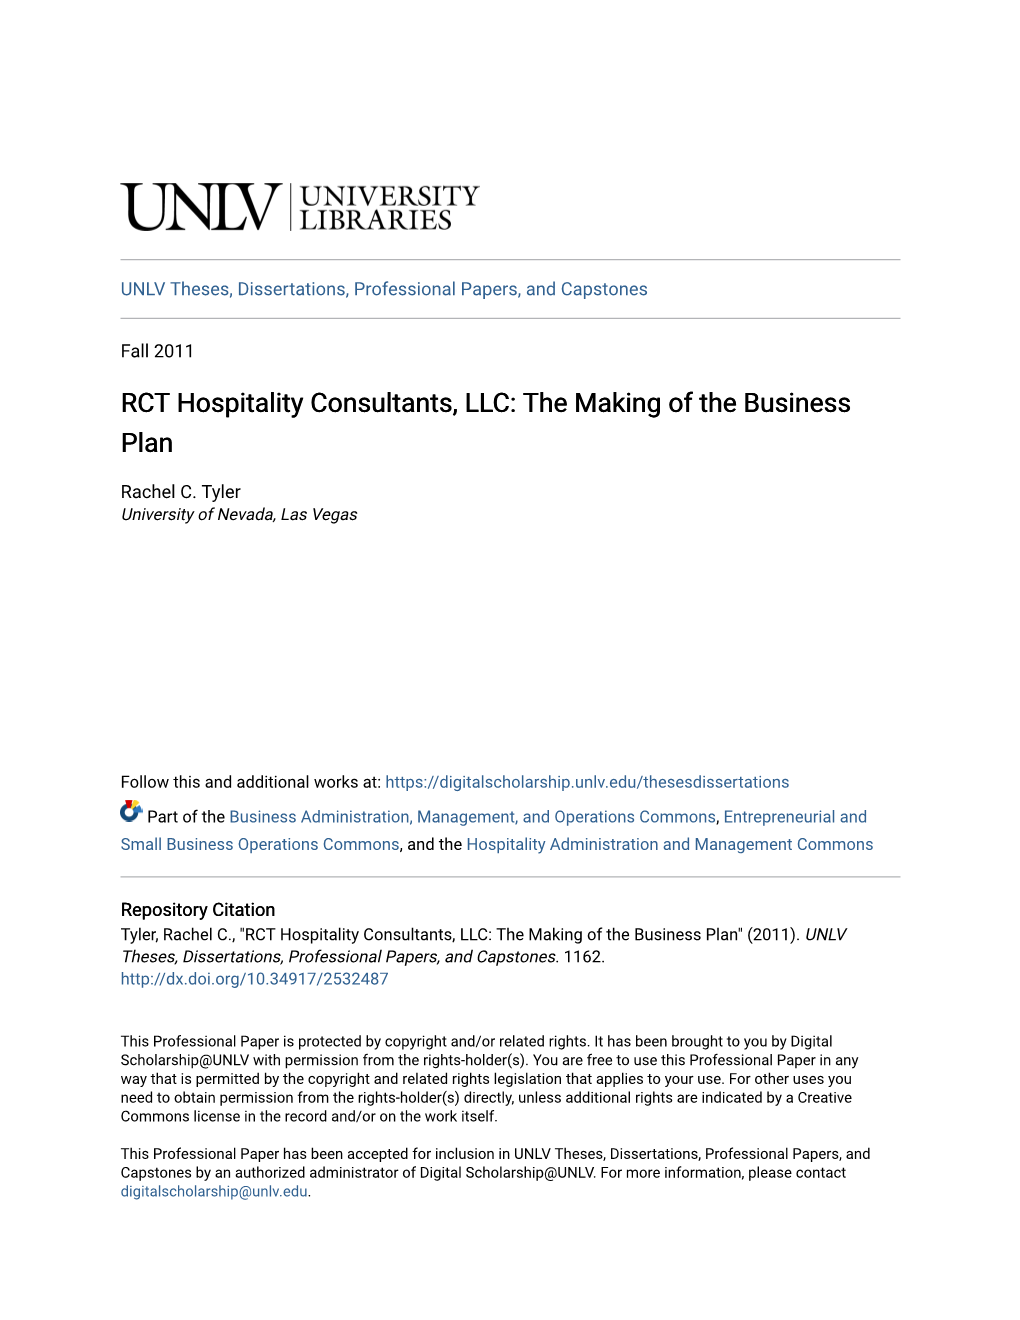 RCT Hospitality Consultants, LLC: the Making of the Business Plan